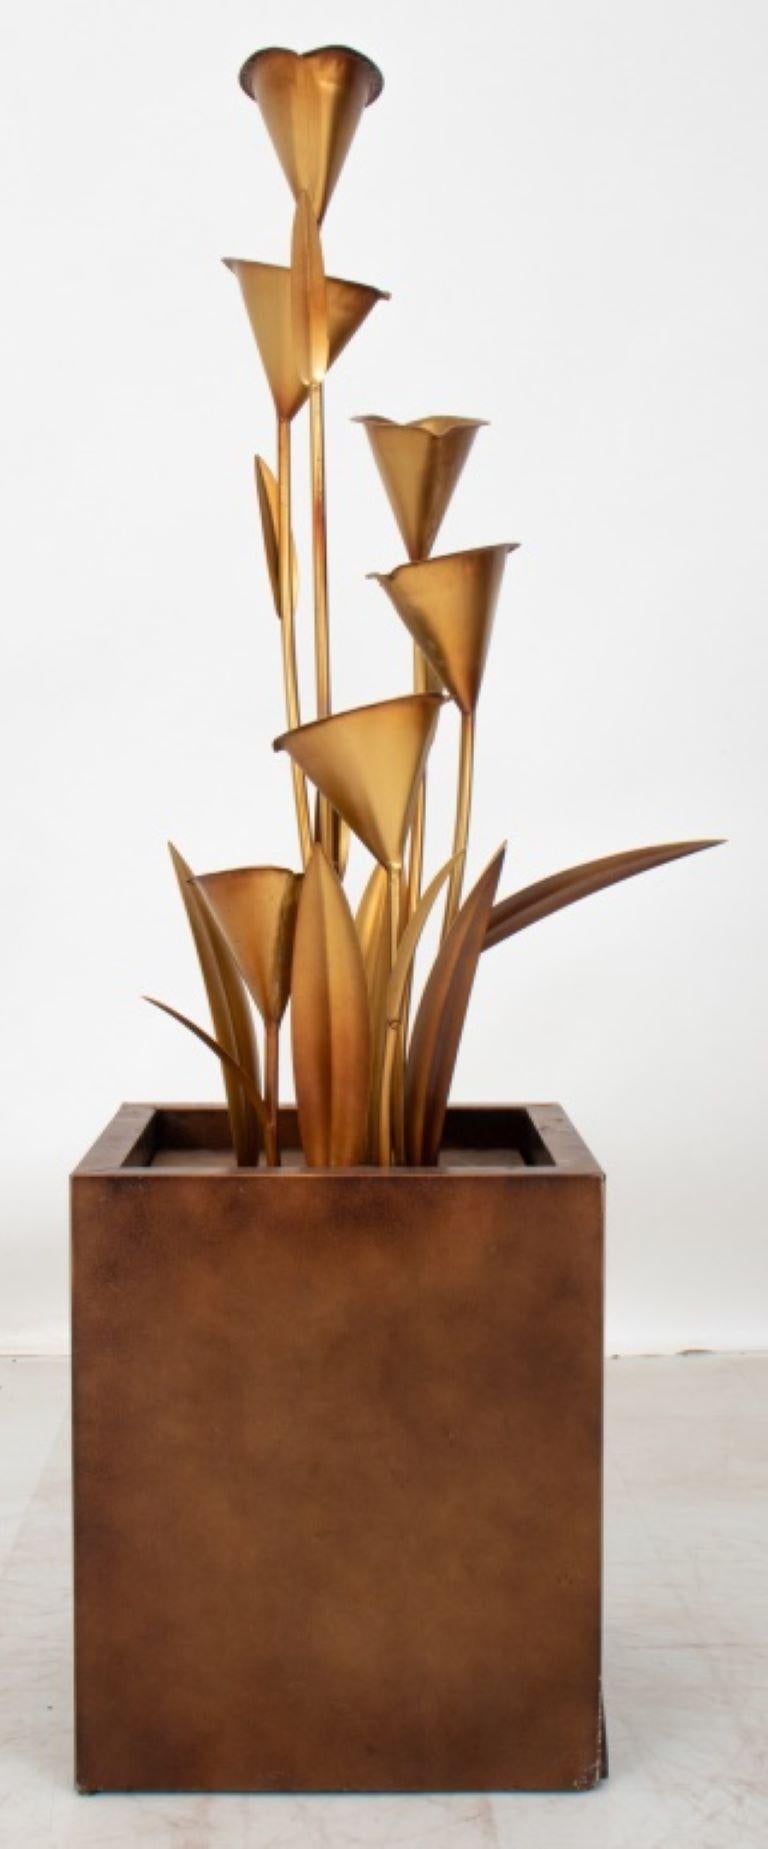 Southeast Asian Style Gilded Lily Fountain, 21st century, with lily blossoms arranged in a spiral fountain. 